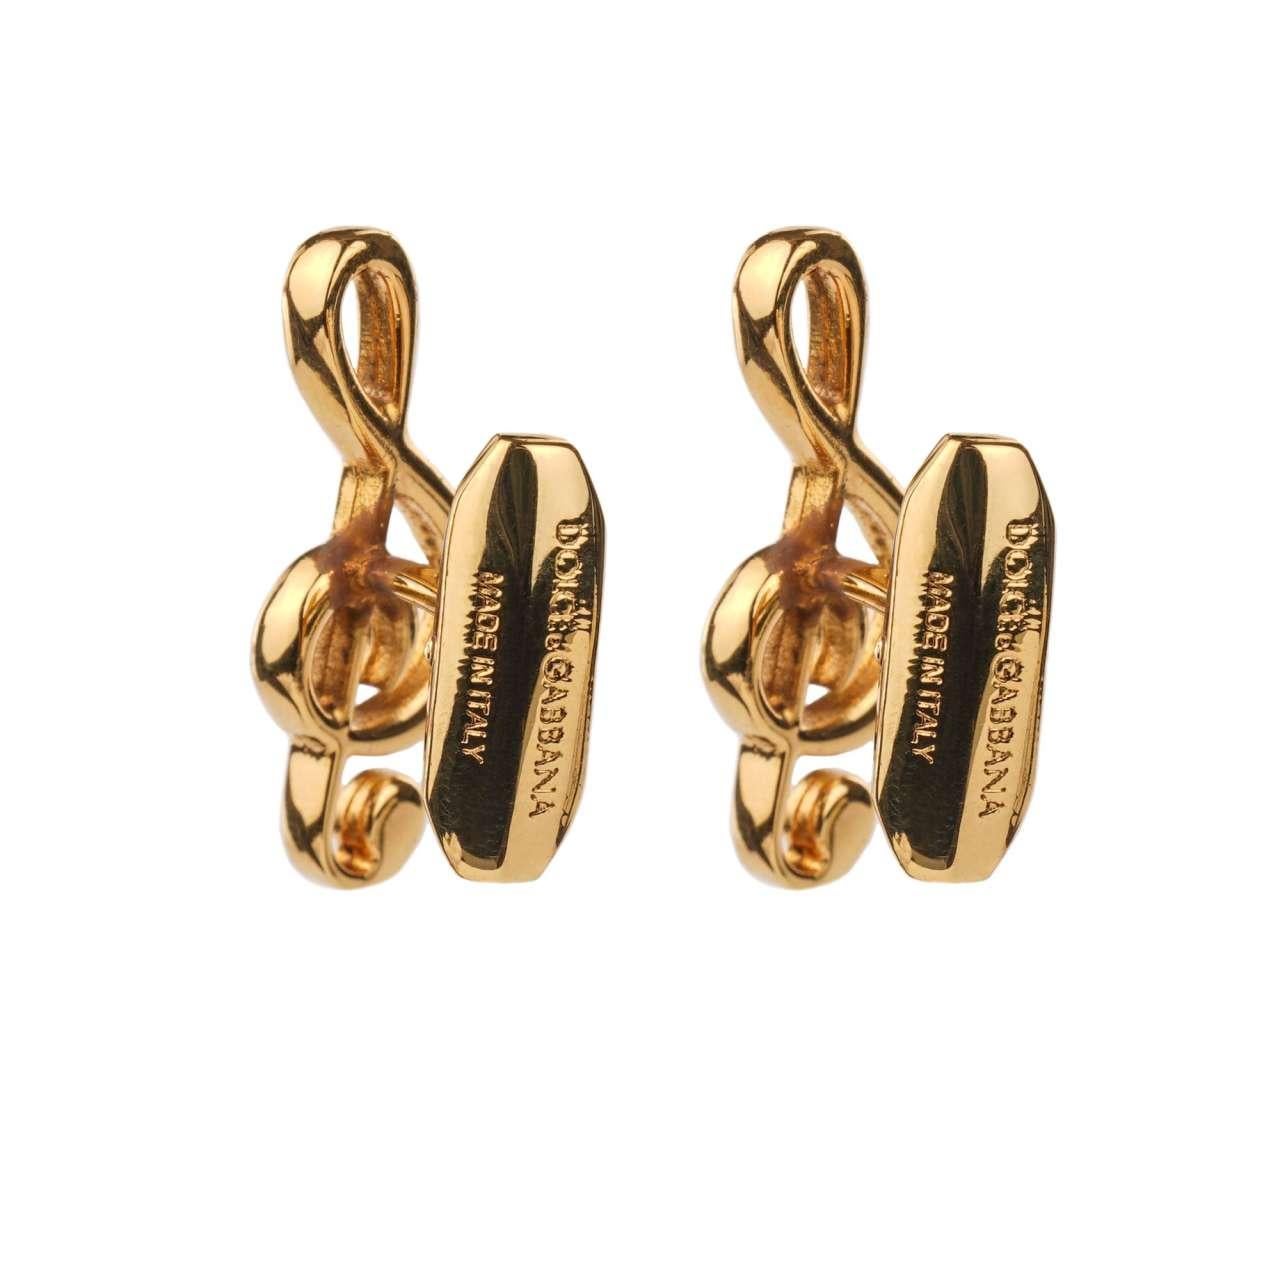 - Treble Clef Cufflinks in gold galvanized metal with small red crystal by DOLCE & GABBANA - New with Box - MADE IN ITALY - Former RRP: EUR 195 - Engraved Dolce&Gabbana Logo - Nickel free - Small red crystal - Model: WFJ3S4-W0001-87655 - Material: